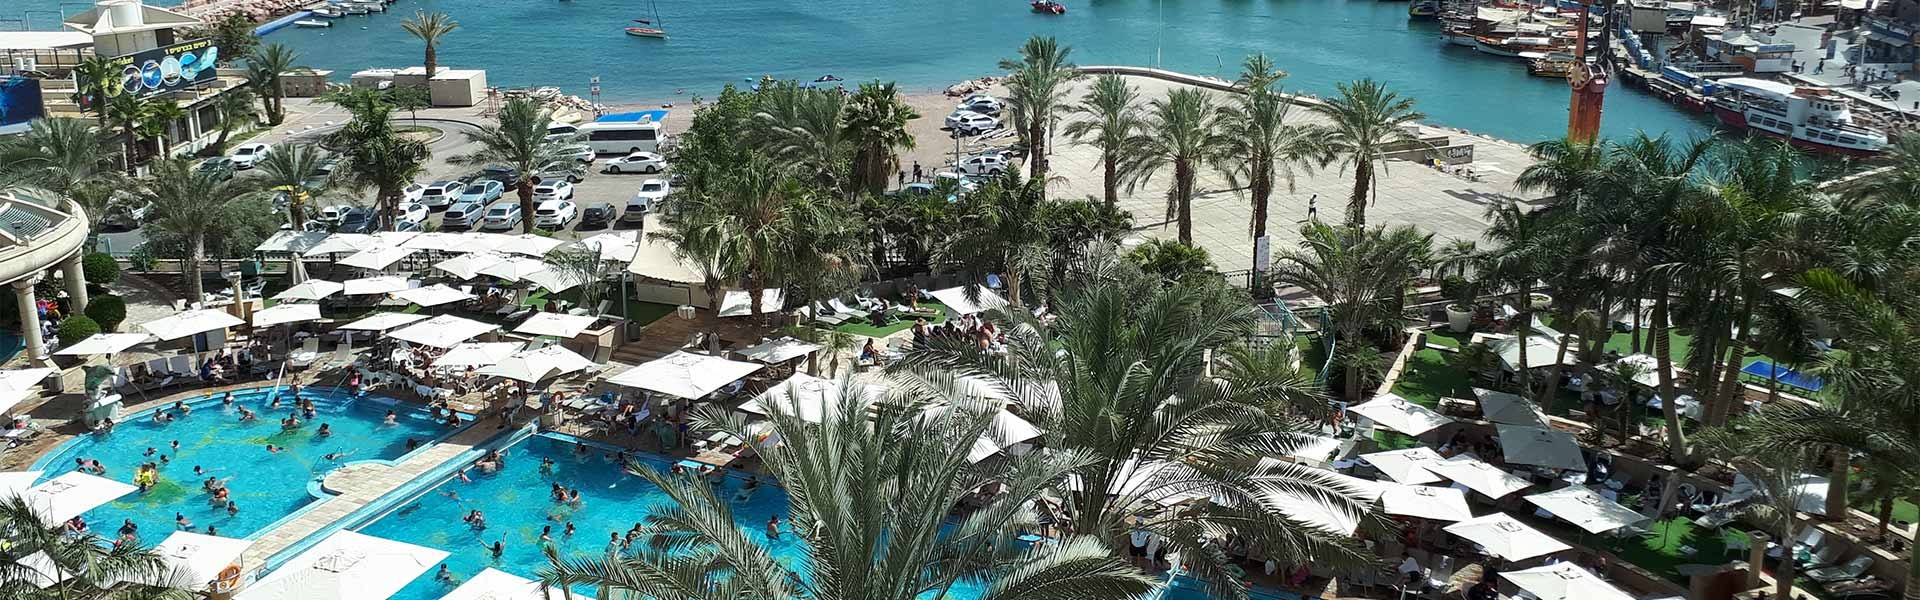 PLAY Eilat Hotel - Local Experience